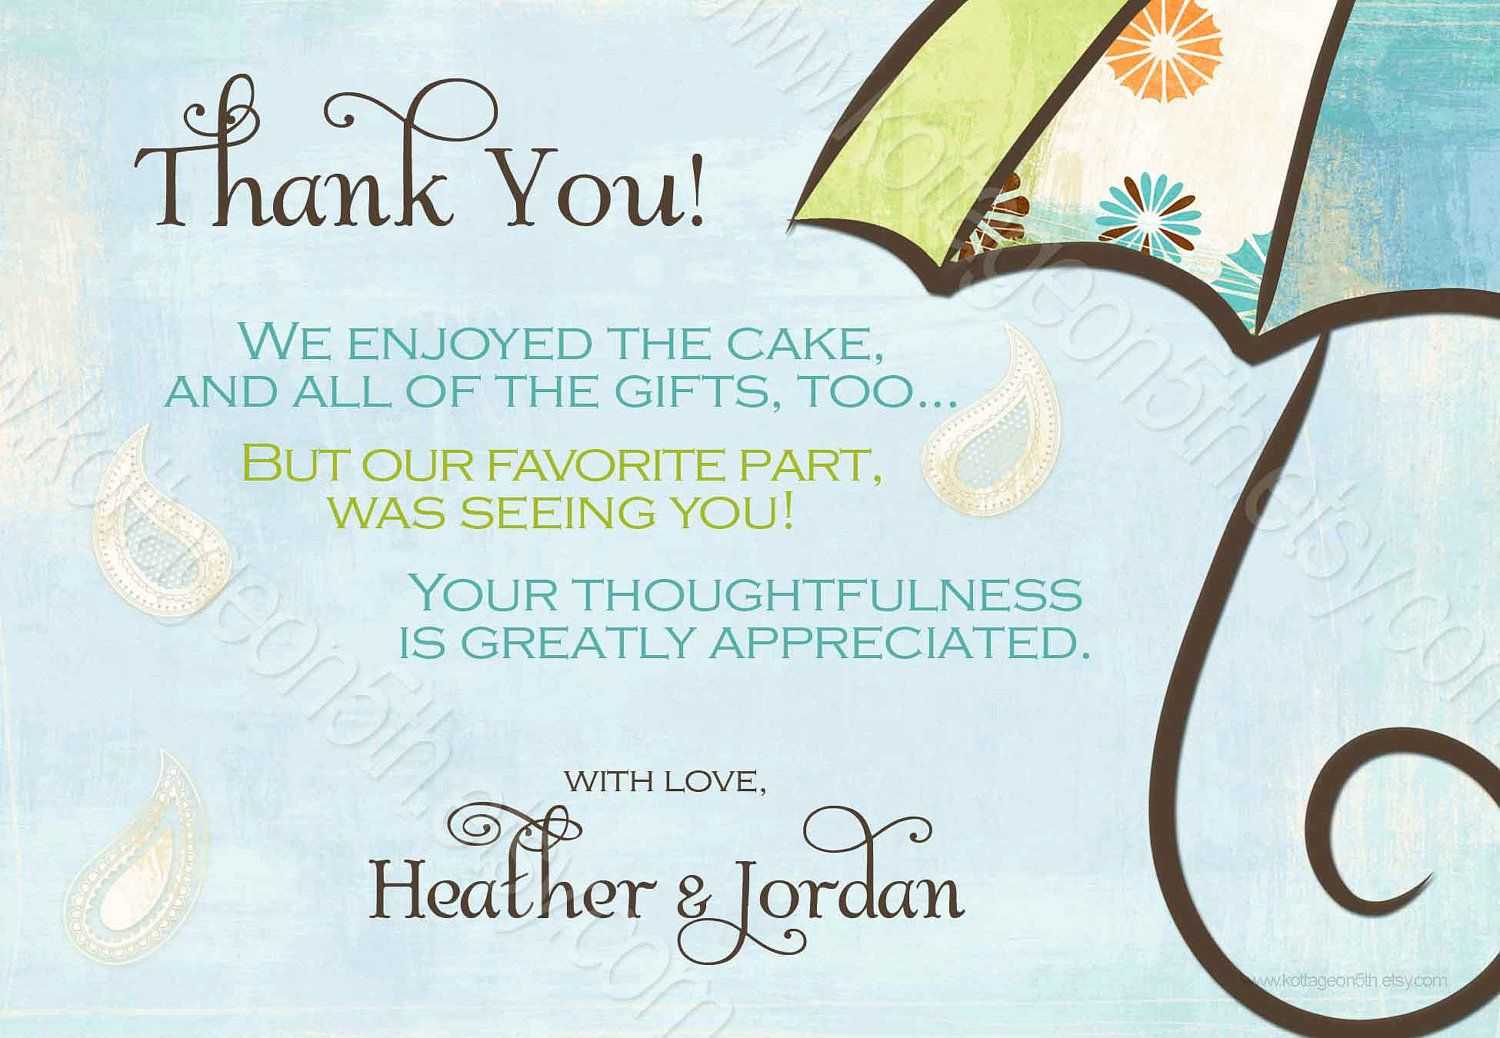 Generic Baby Shower Thank You Wording - Yahoo Image Search With Template For Baby Shower Thank You Cards